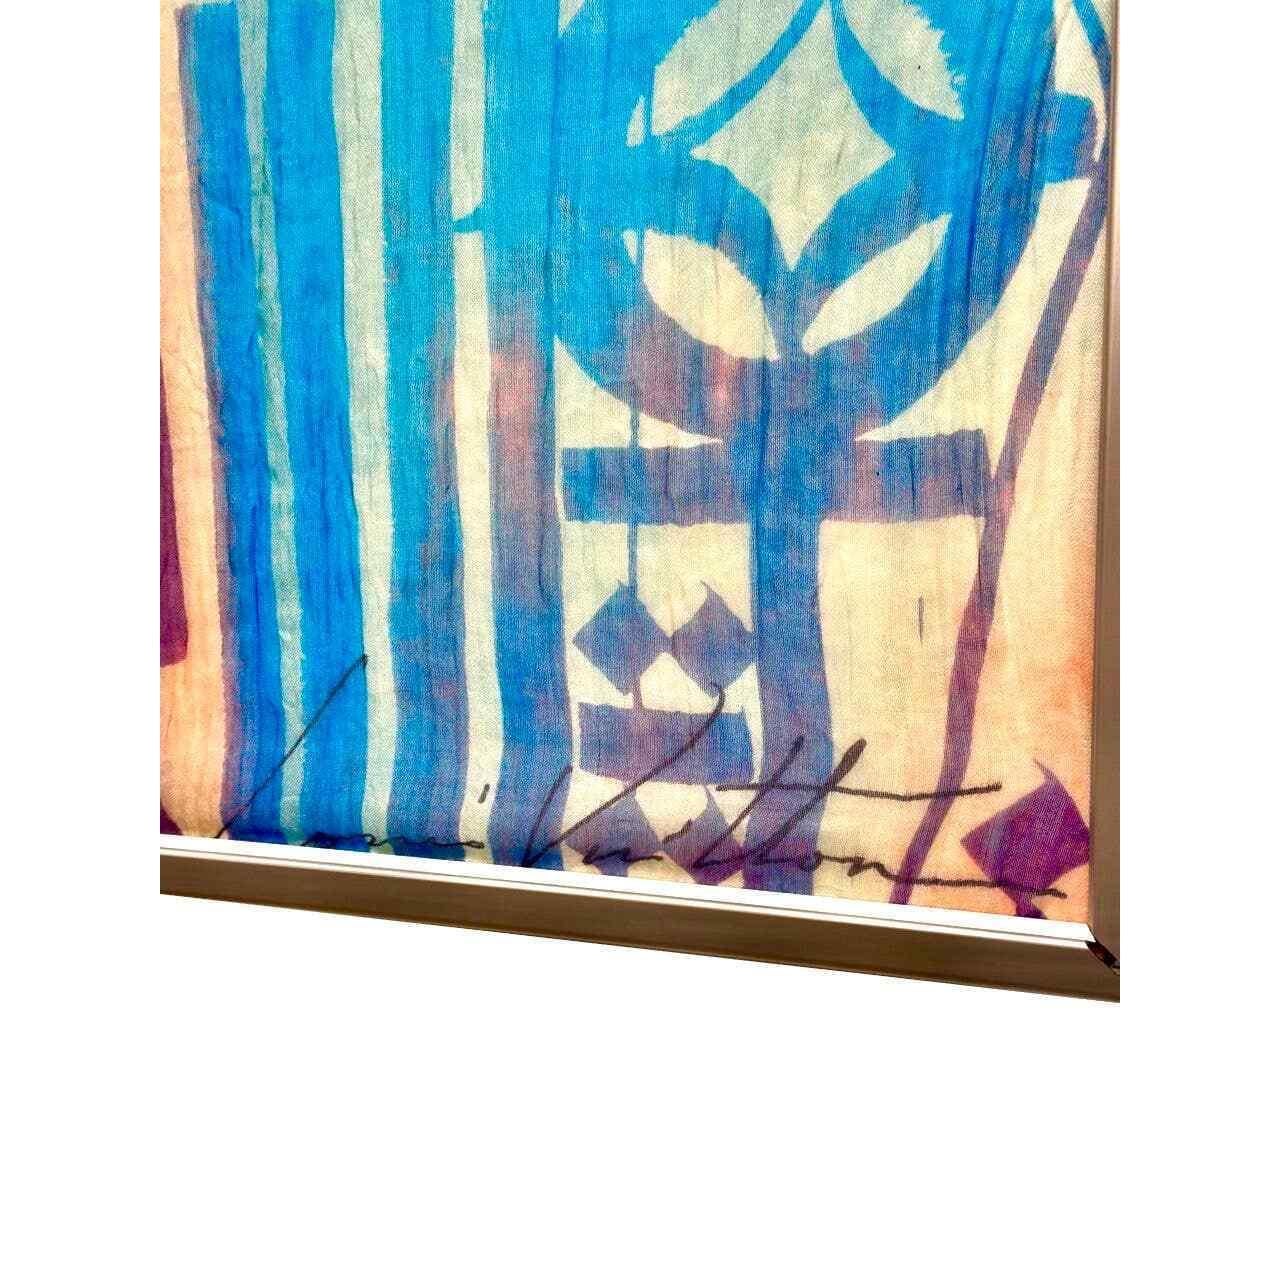 RETNA Signature X Louis Vuitton LV Graffiti Collection Piece by LA Street Art In Good Condition For Sale In Downey, CA